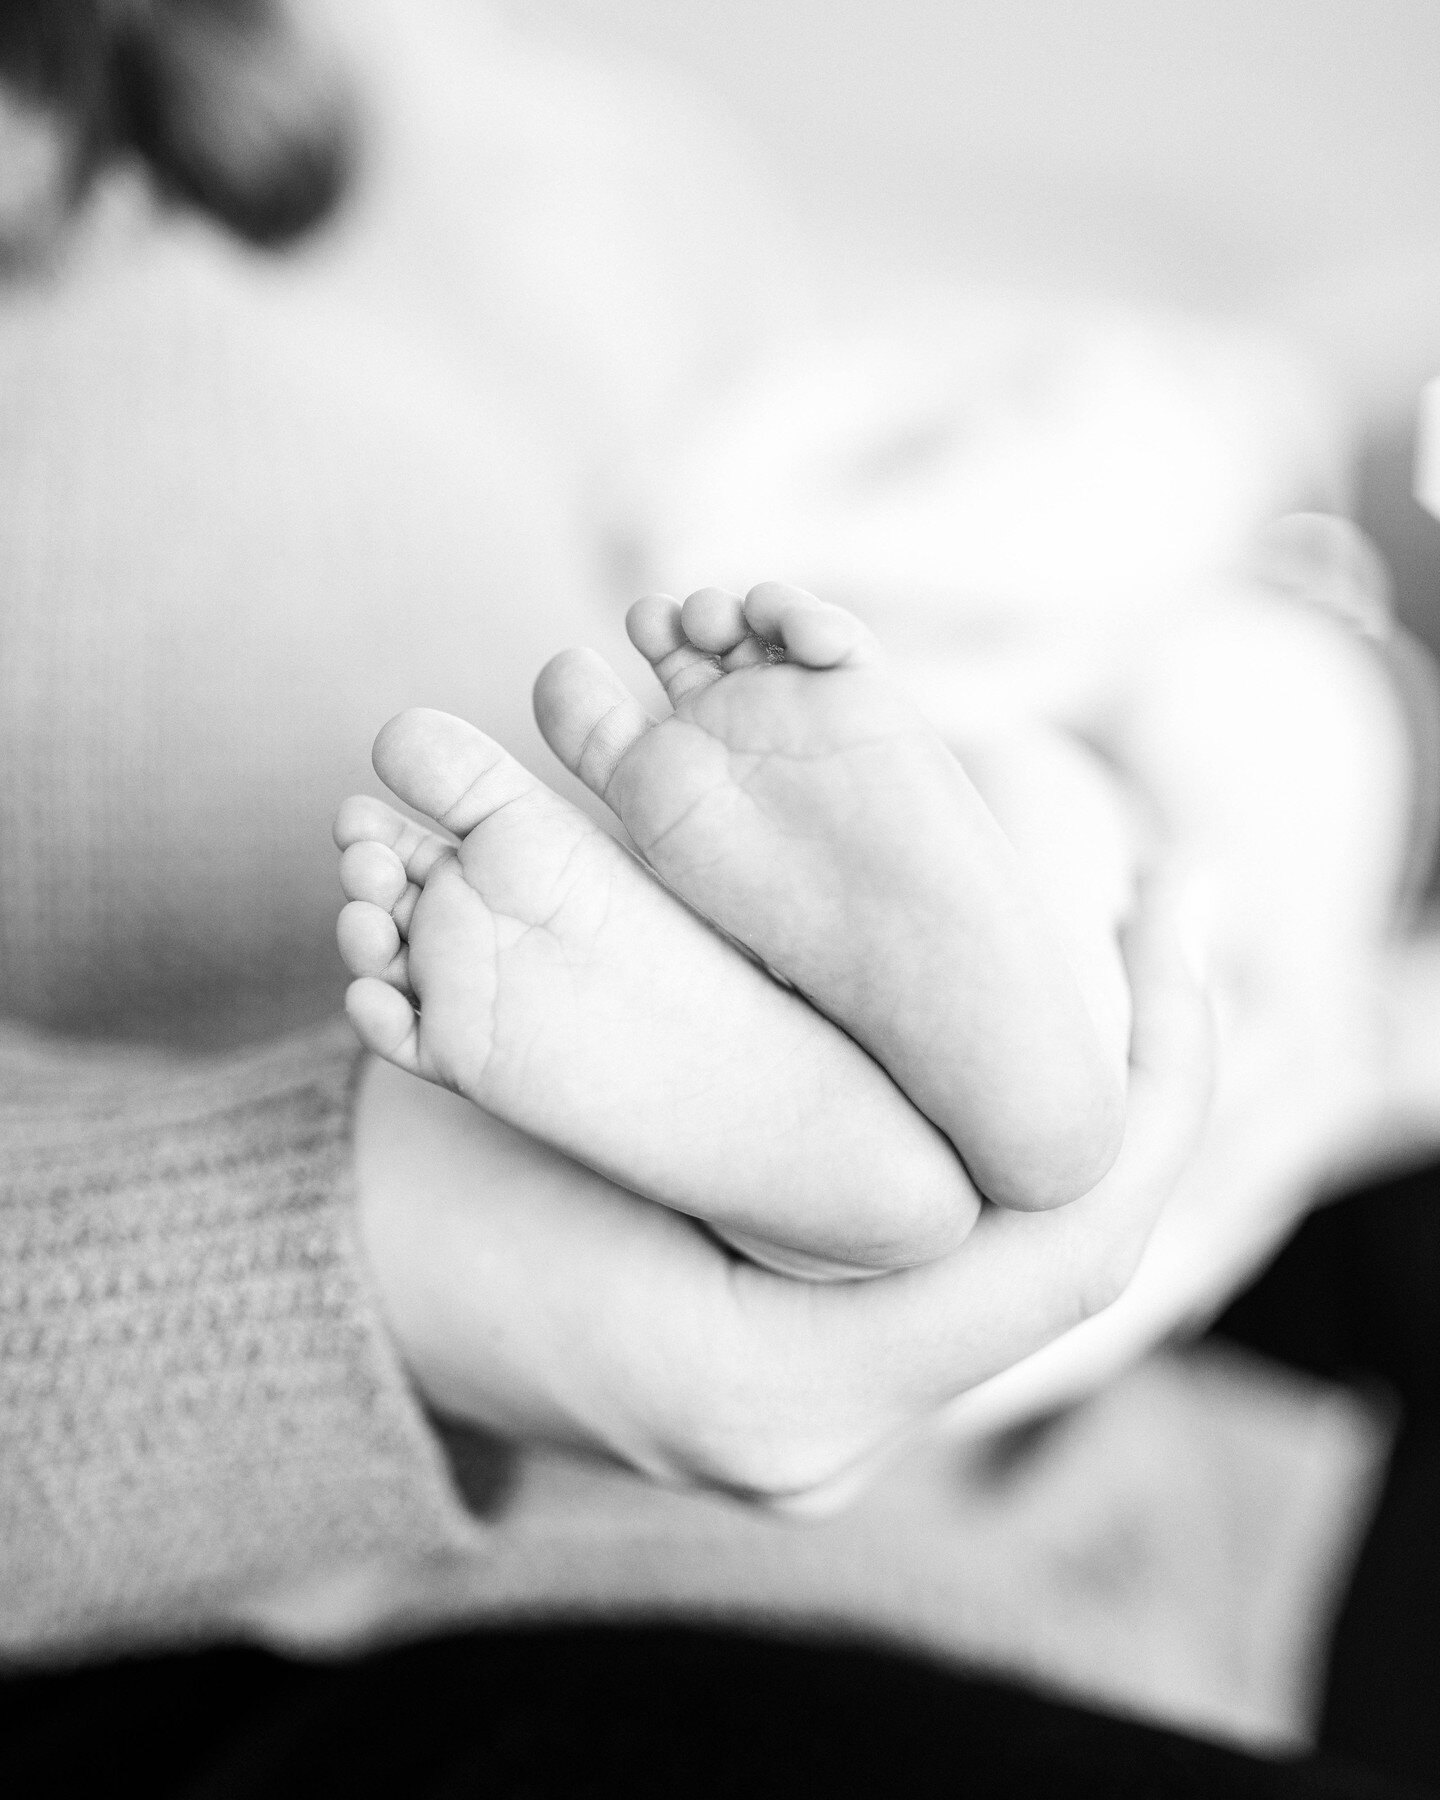 Sweet little baby toes. 

I love capturing these types of detailed images of newborns. Your baby grows so fast; that's why capturing the tiniest little detail like fingers, toes, and noses means so much. 
.
.
.
.
.
.
.
.
.
.
.
#newhampshirenewbornpho